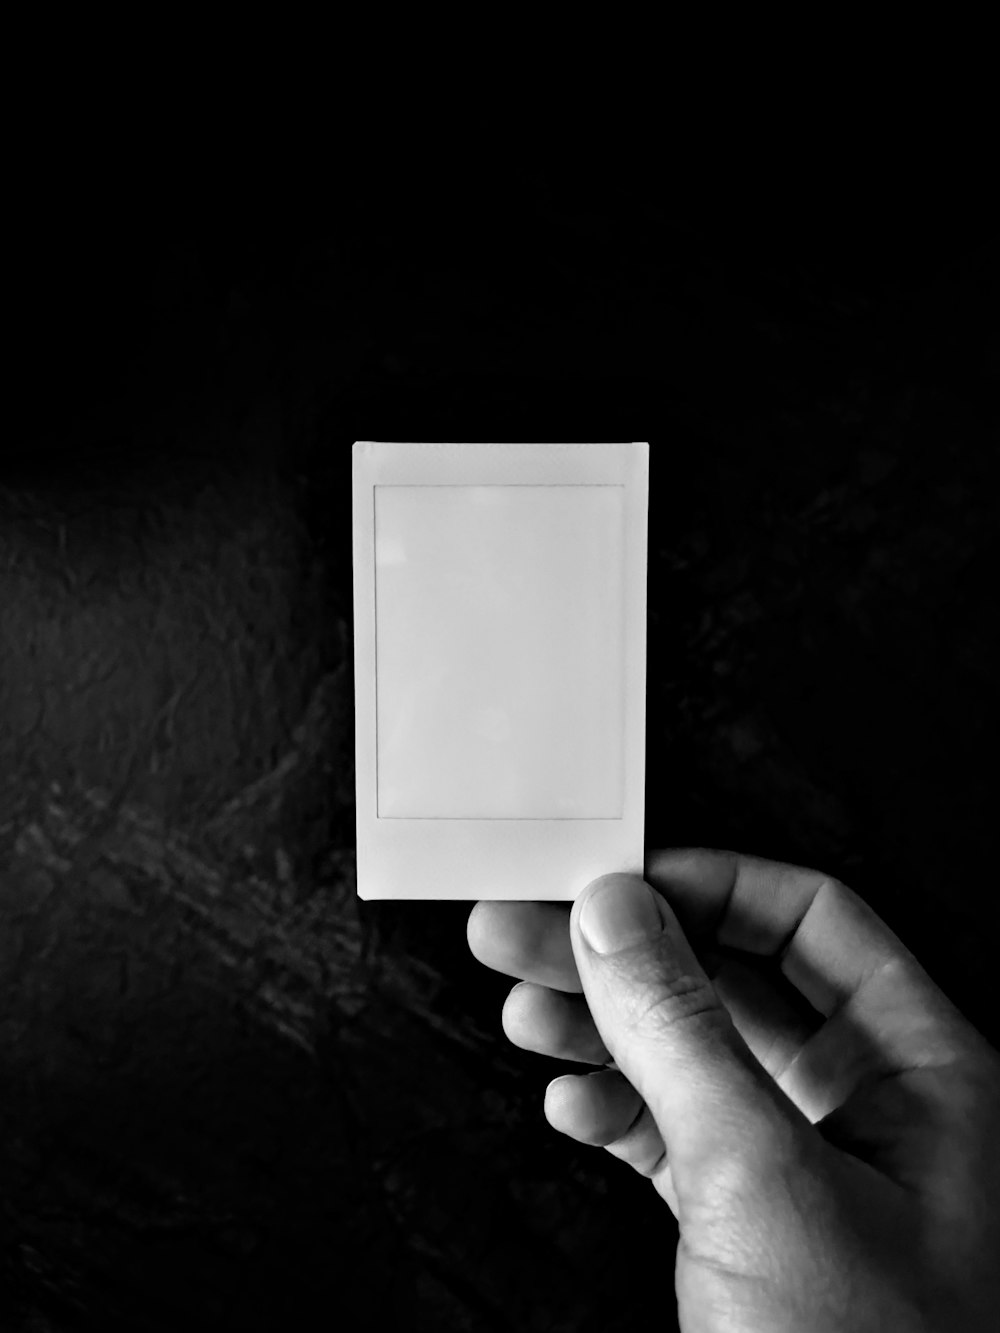 a black and white photo of a hand holding a square object